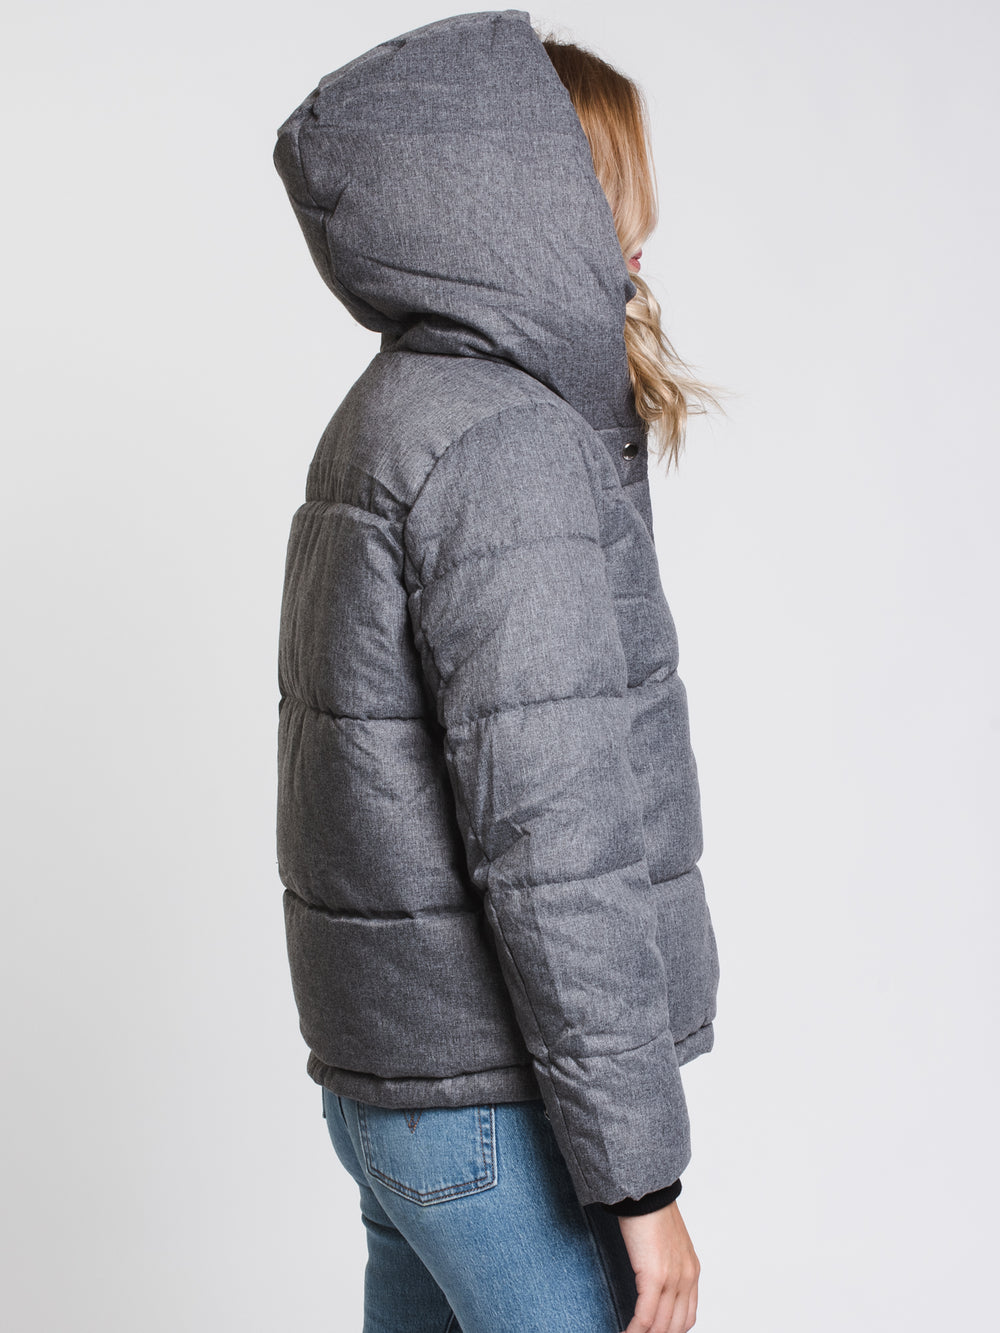 WOMENS VIKKI QUILTED JACKET - LT GREY - CLEARANCE